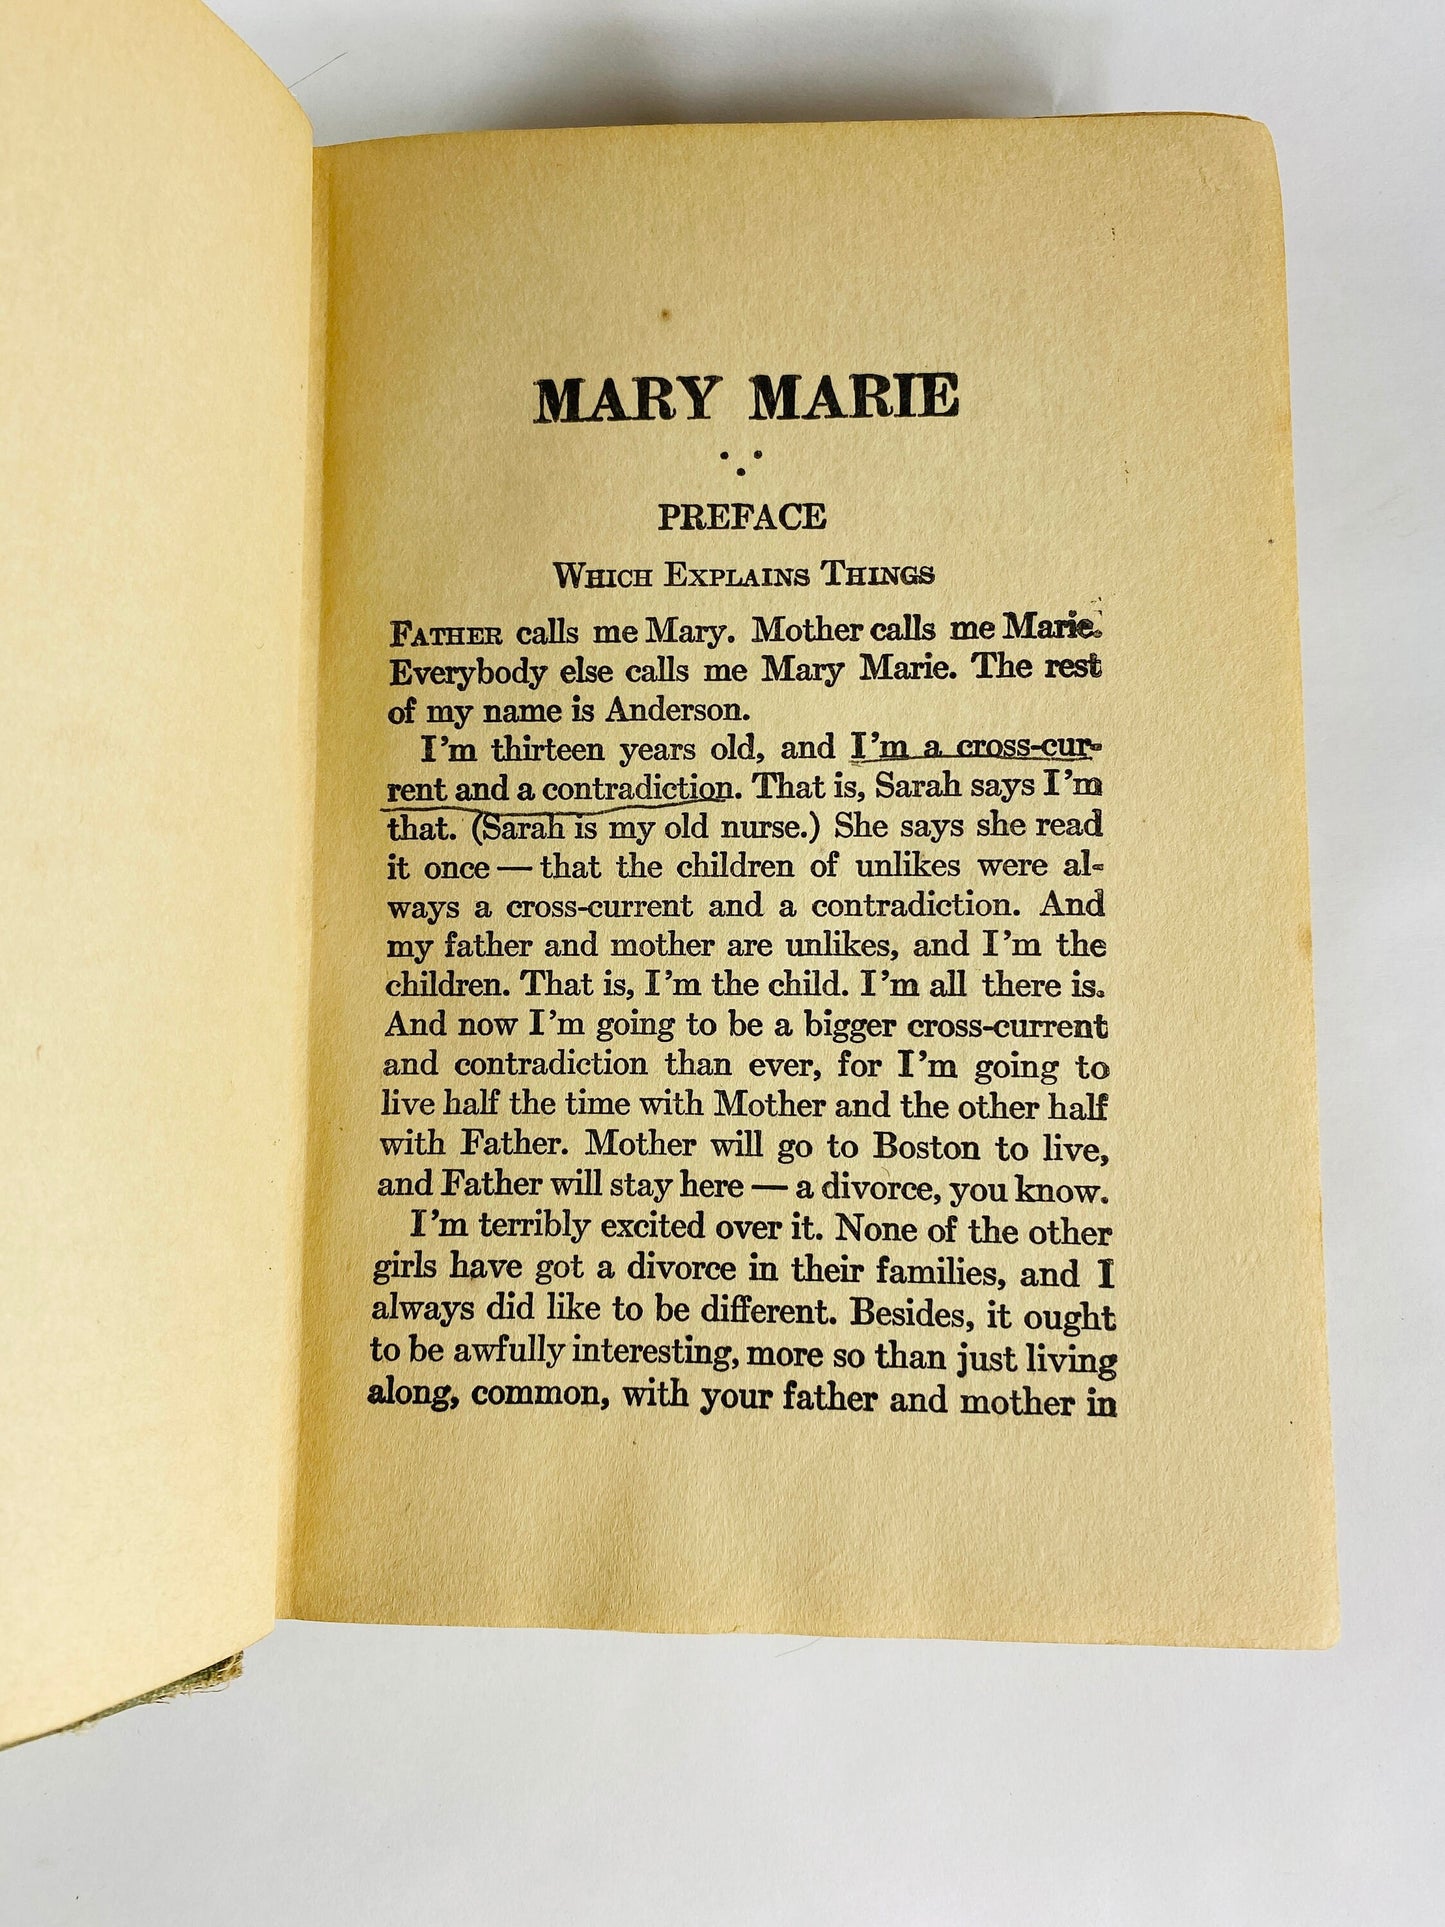 Mary Marie book by Eleanor Porter Vintage book circa 1920 Child's perspective on separation and divorce Author of Pollyanna Grosset & Dunlap